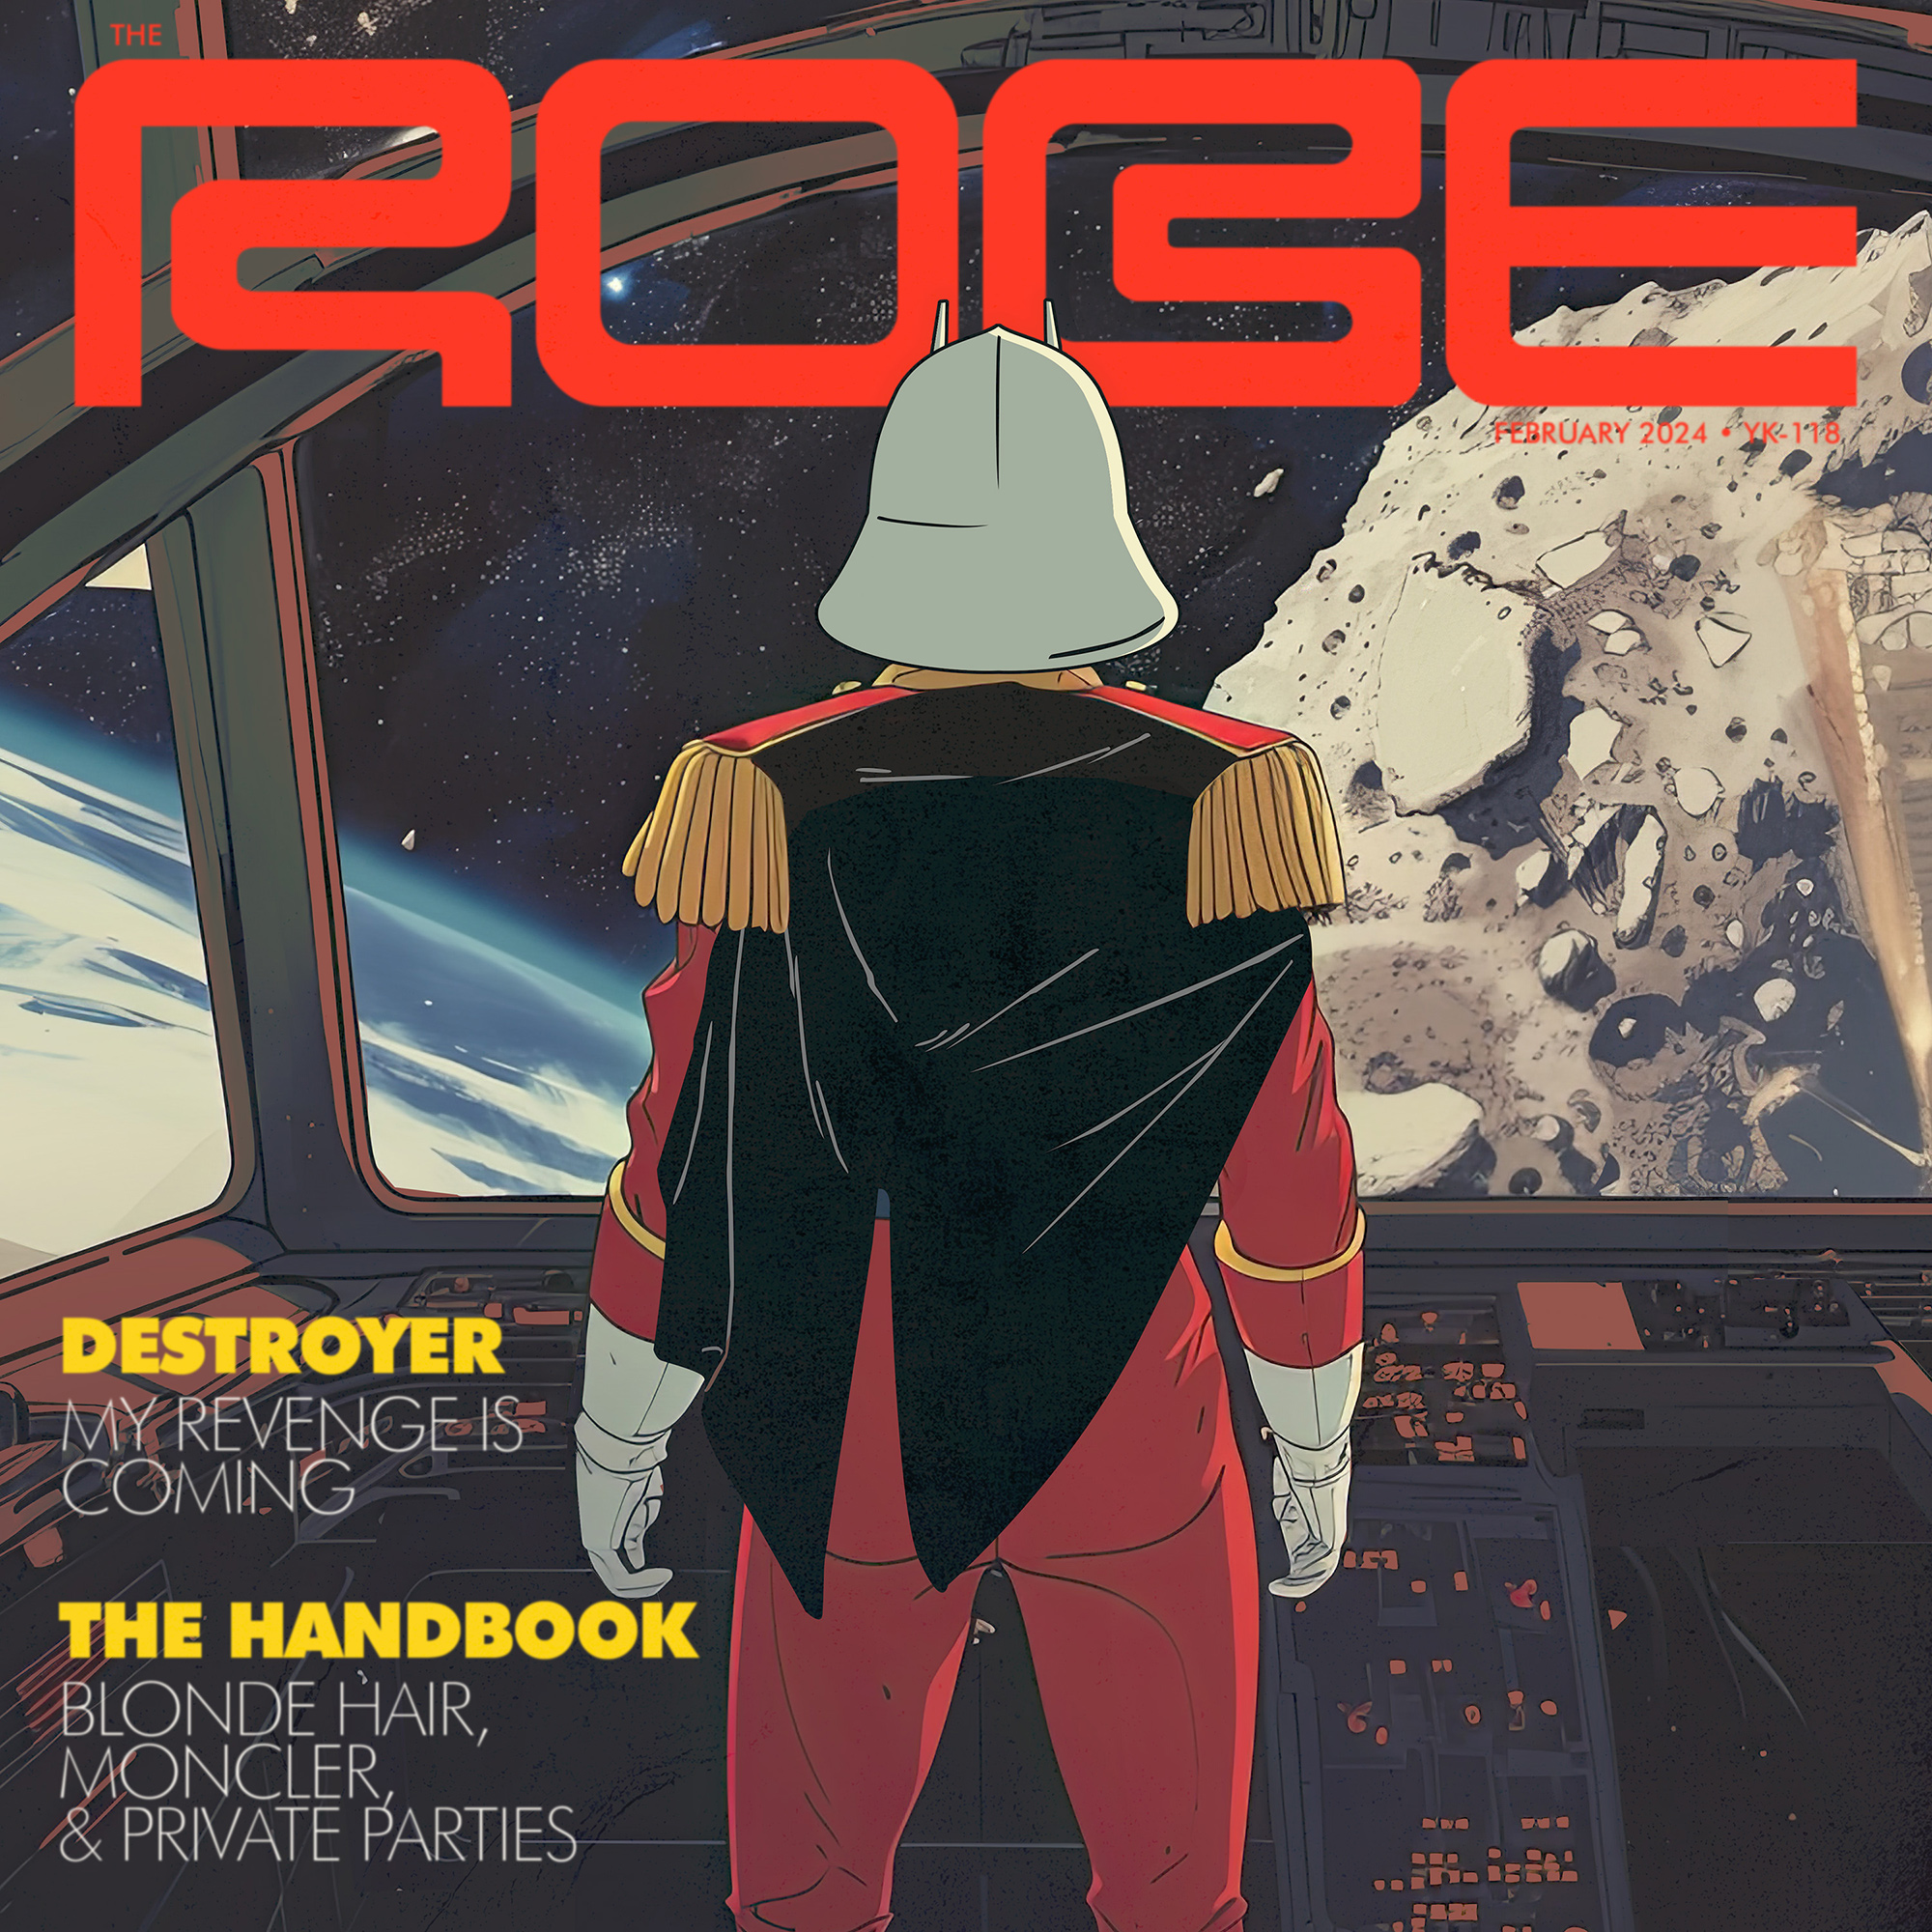 The Robe releases “Destroyer” & “The Handbook”